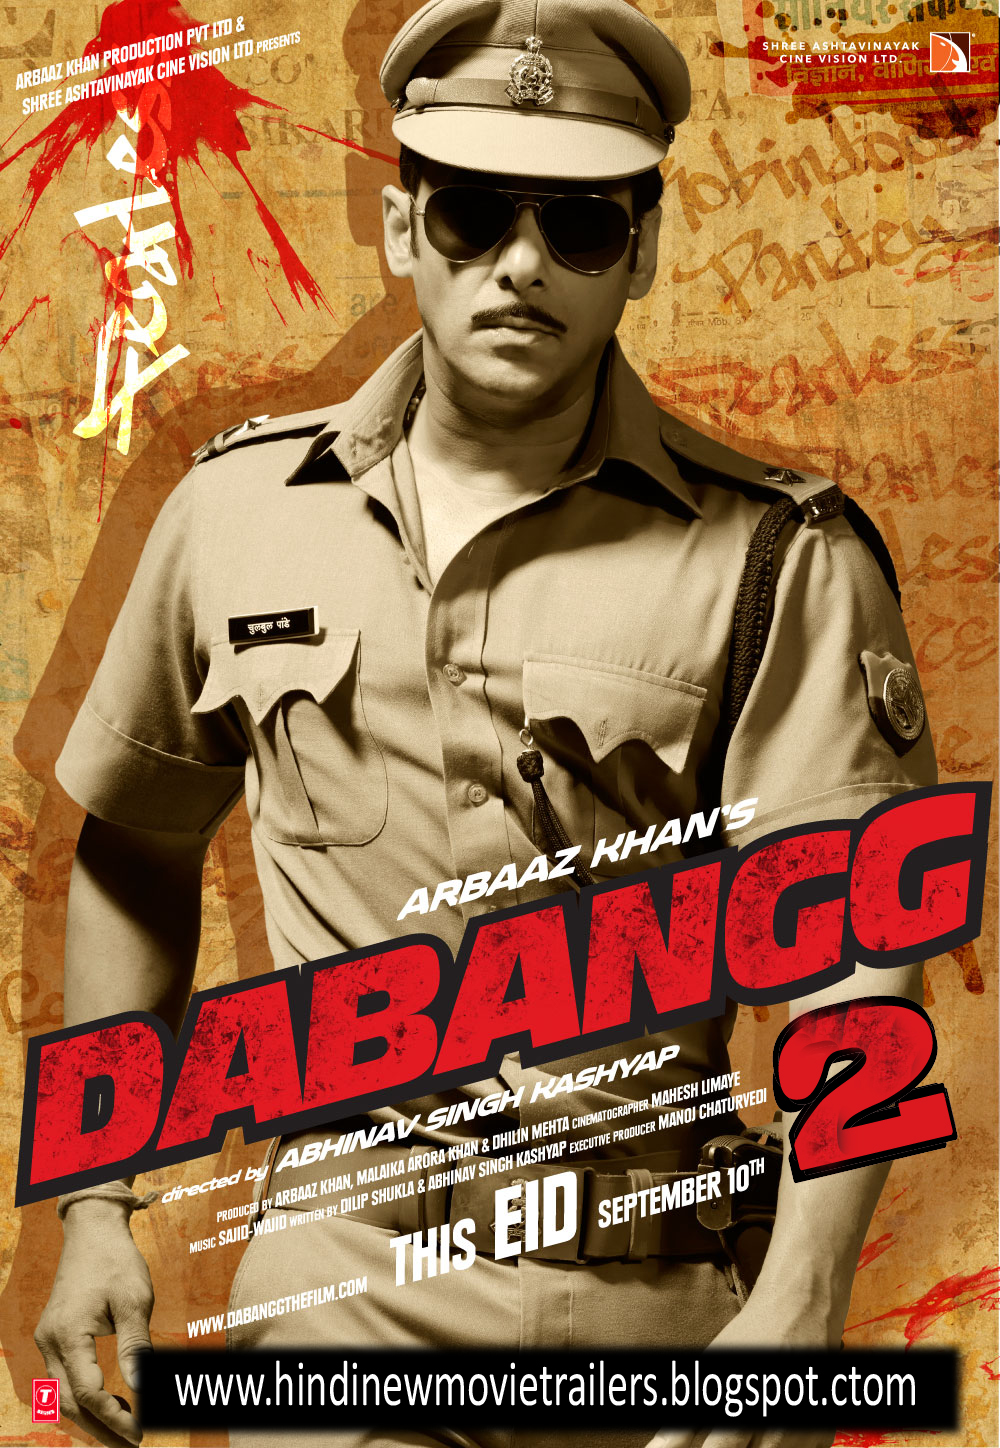 Dabangg 2 Movie Reviews Leaked Trailers Wallpapers And Leaked Songs Songs By Lyrics